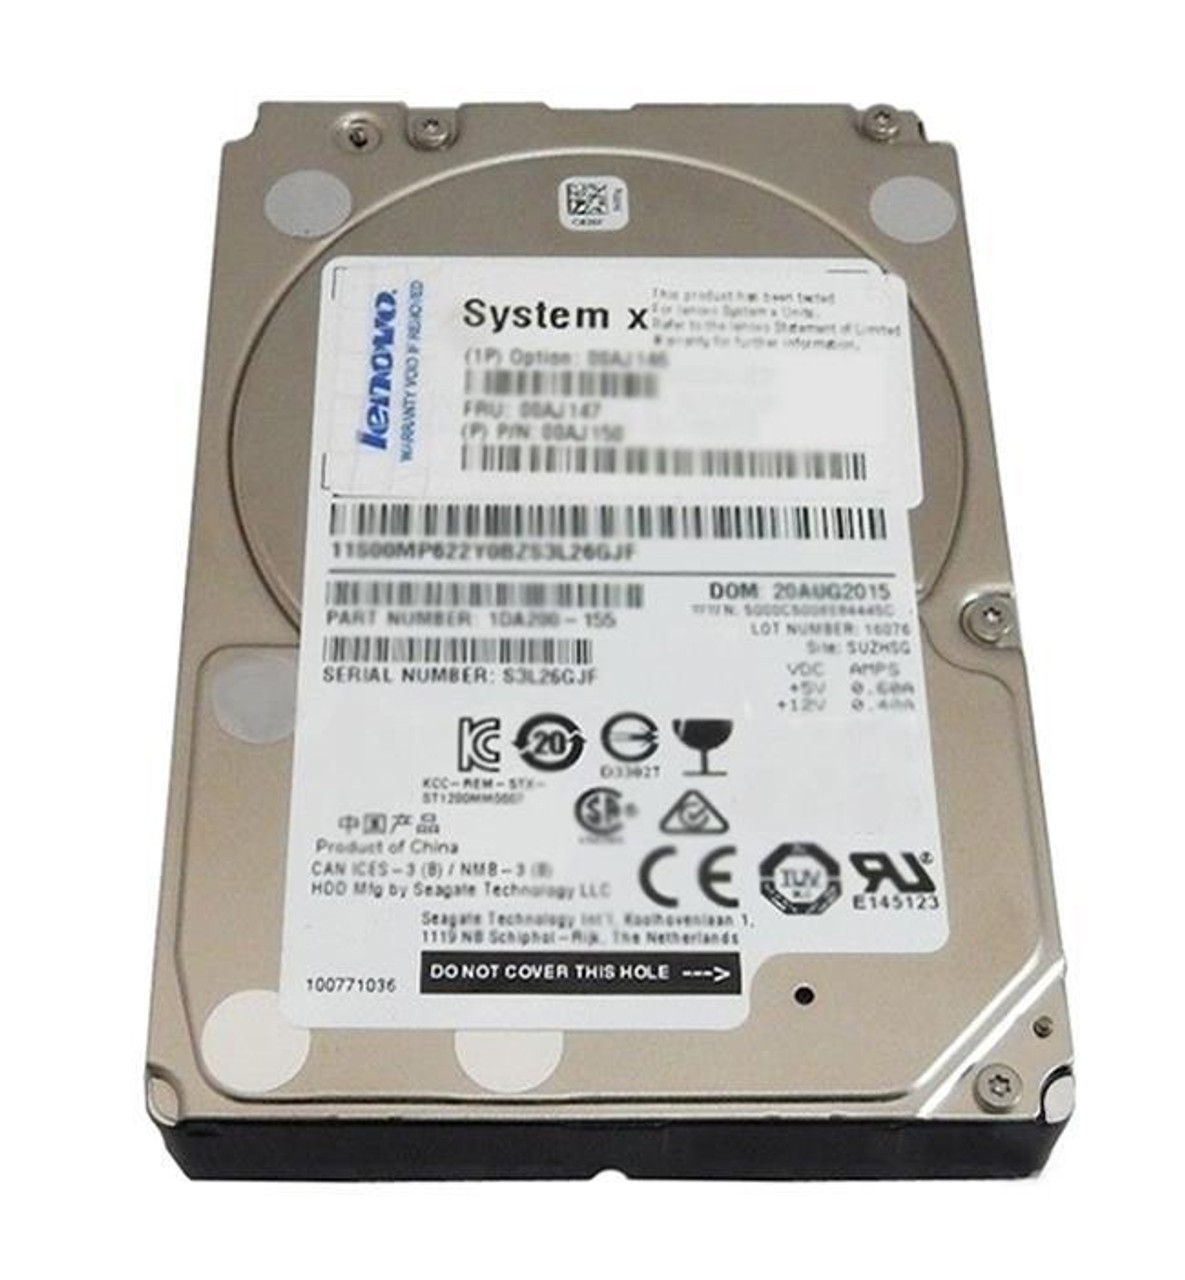 01GV040 Lenovo 900GB 15000RPM SAS 12Gbps Hot Swap (512e) 2.5-inch Internal Hard Drive with 3.5-inch Carrier for System x